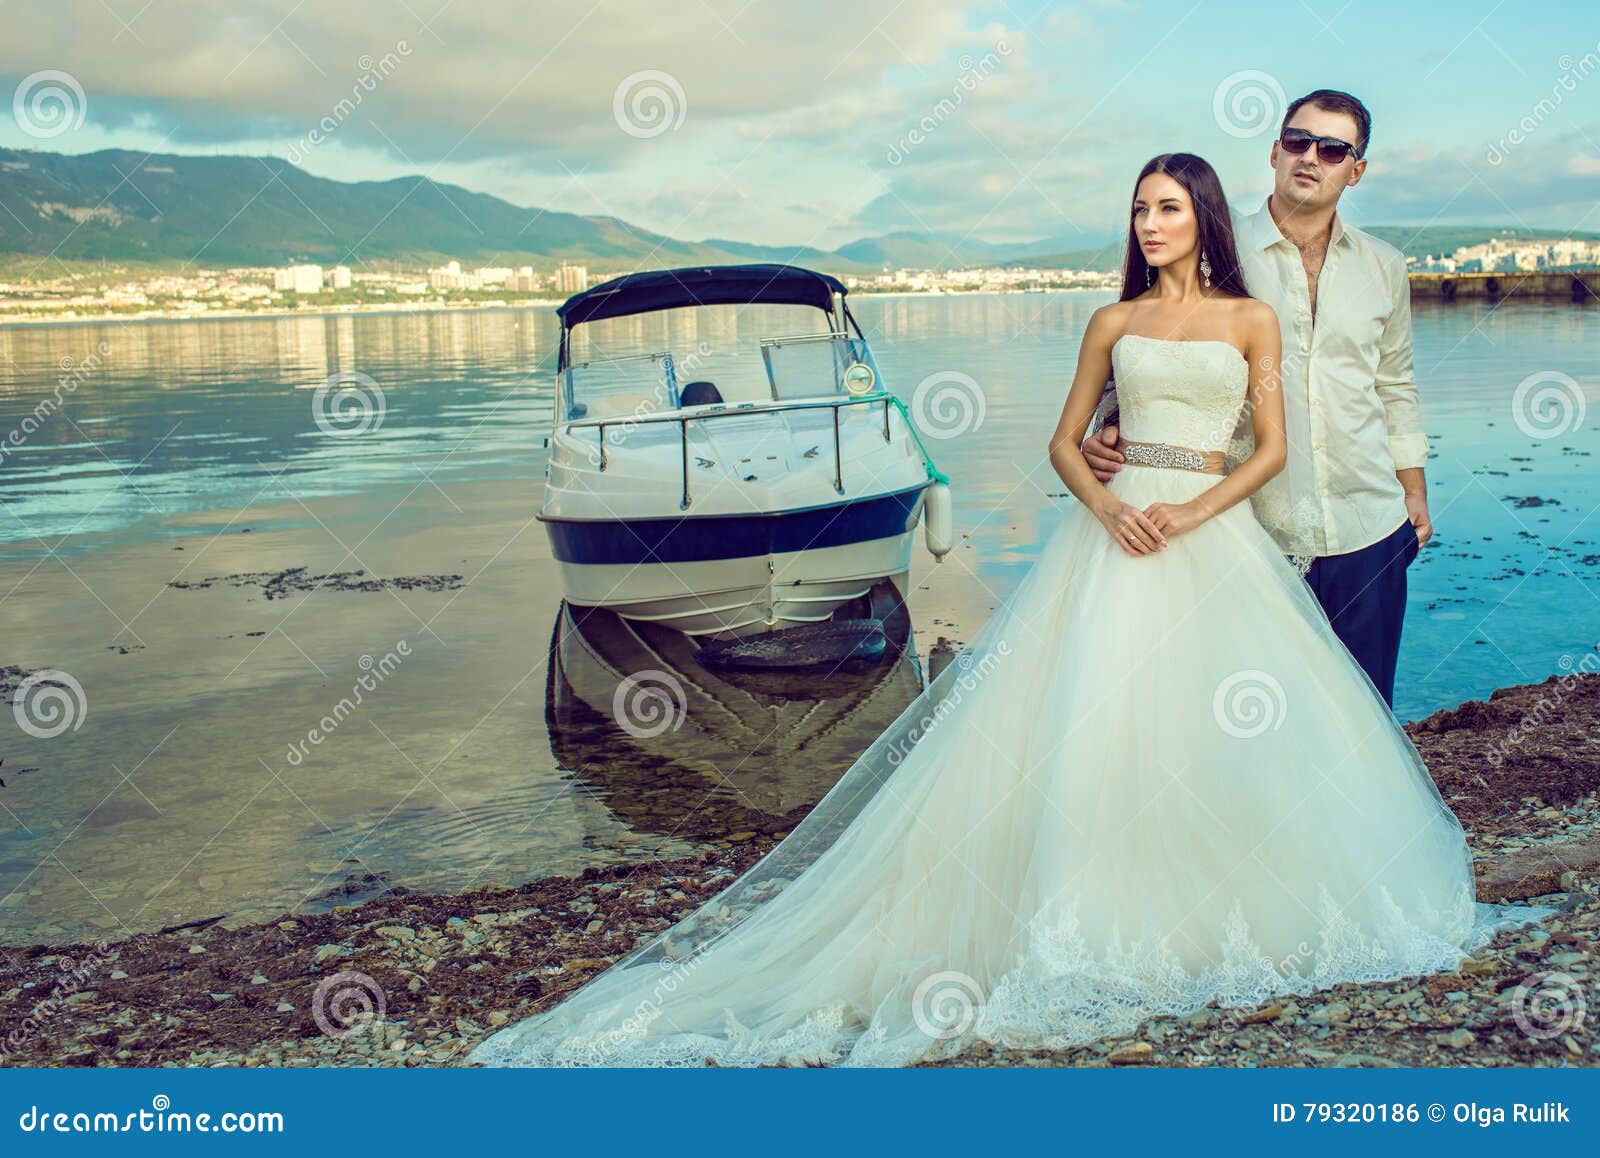 Ethnic Couple Engagement Wedding Young Turkish Together Love Blue Dress  Stock Photo by ©tlorna 4574366